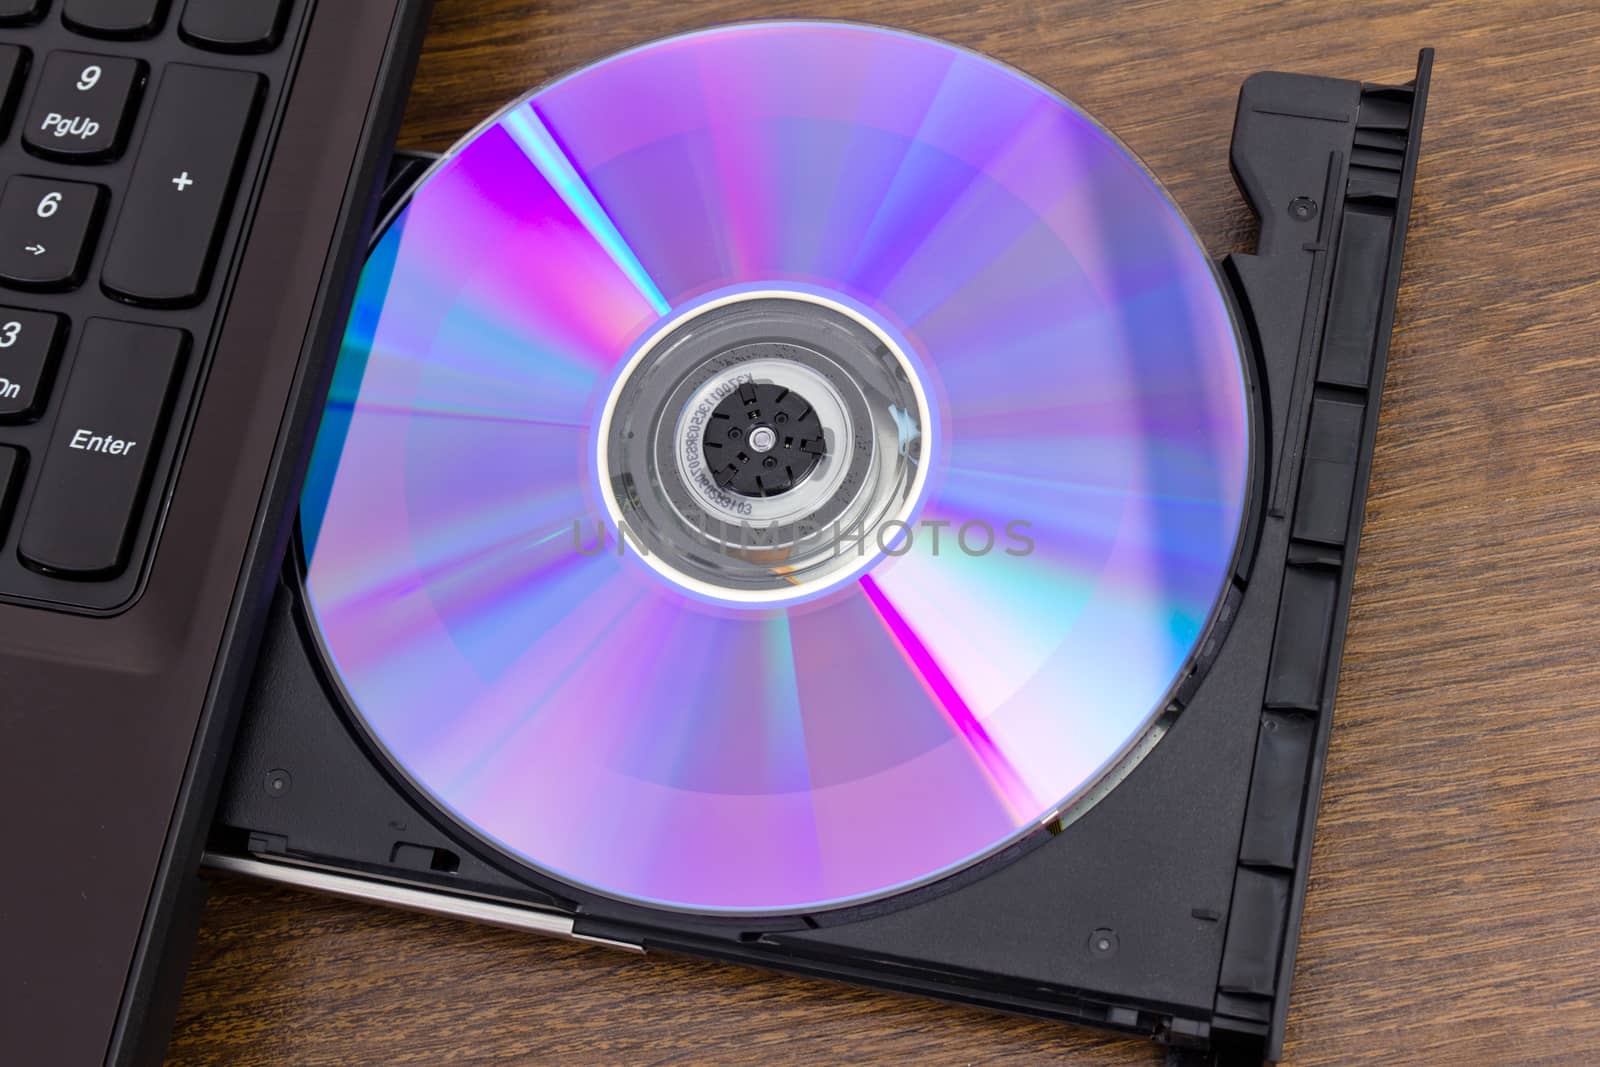 the new DVD disk cutting-in in a notebook